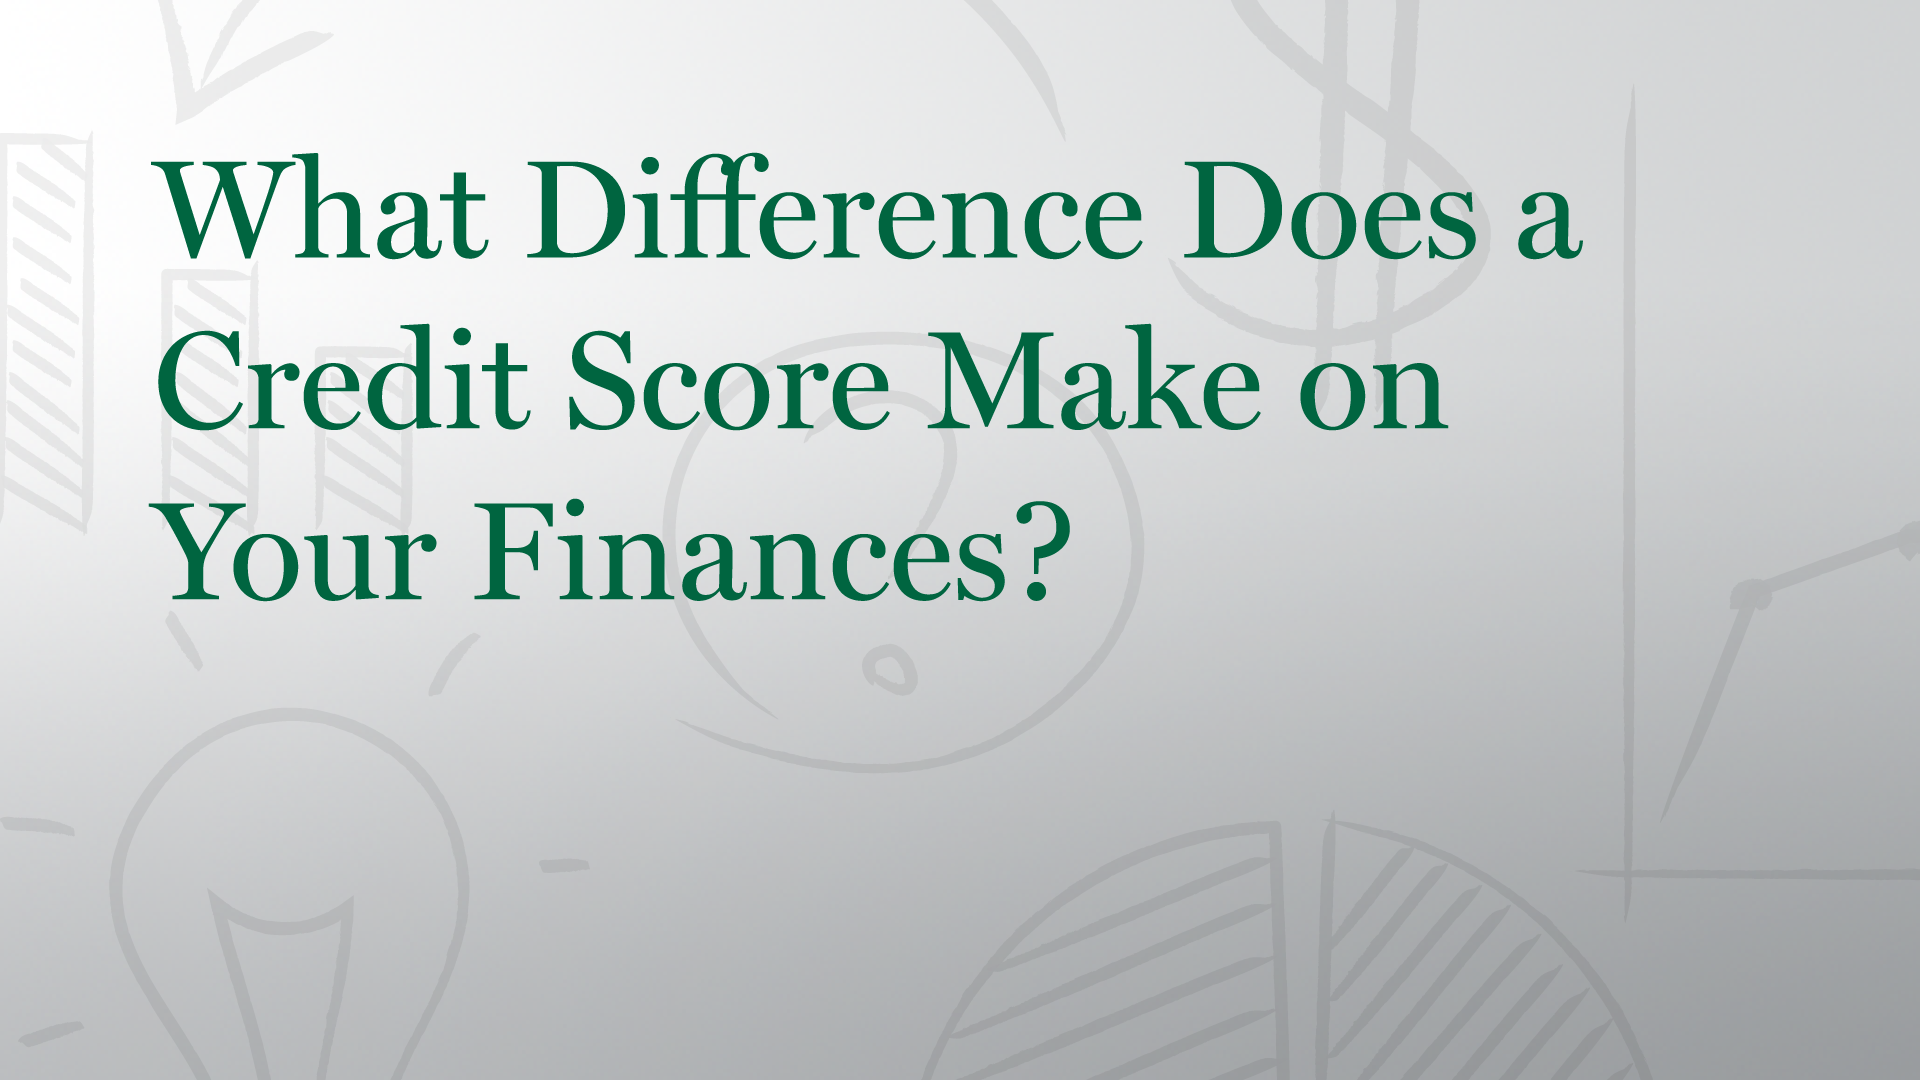 What Difference Does a Credit Score make on Your Finances?